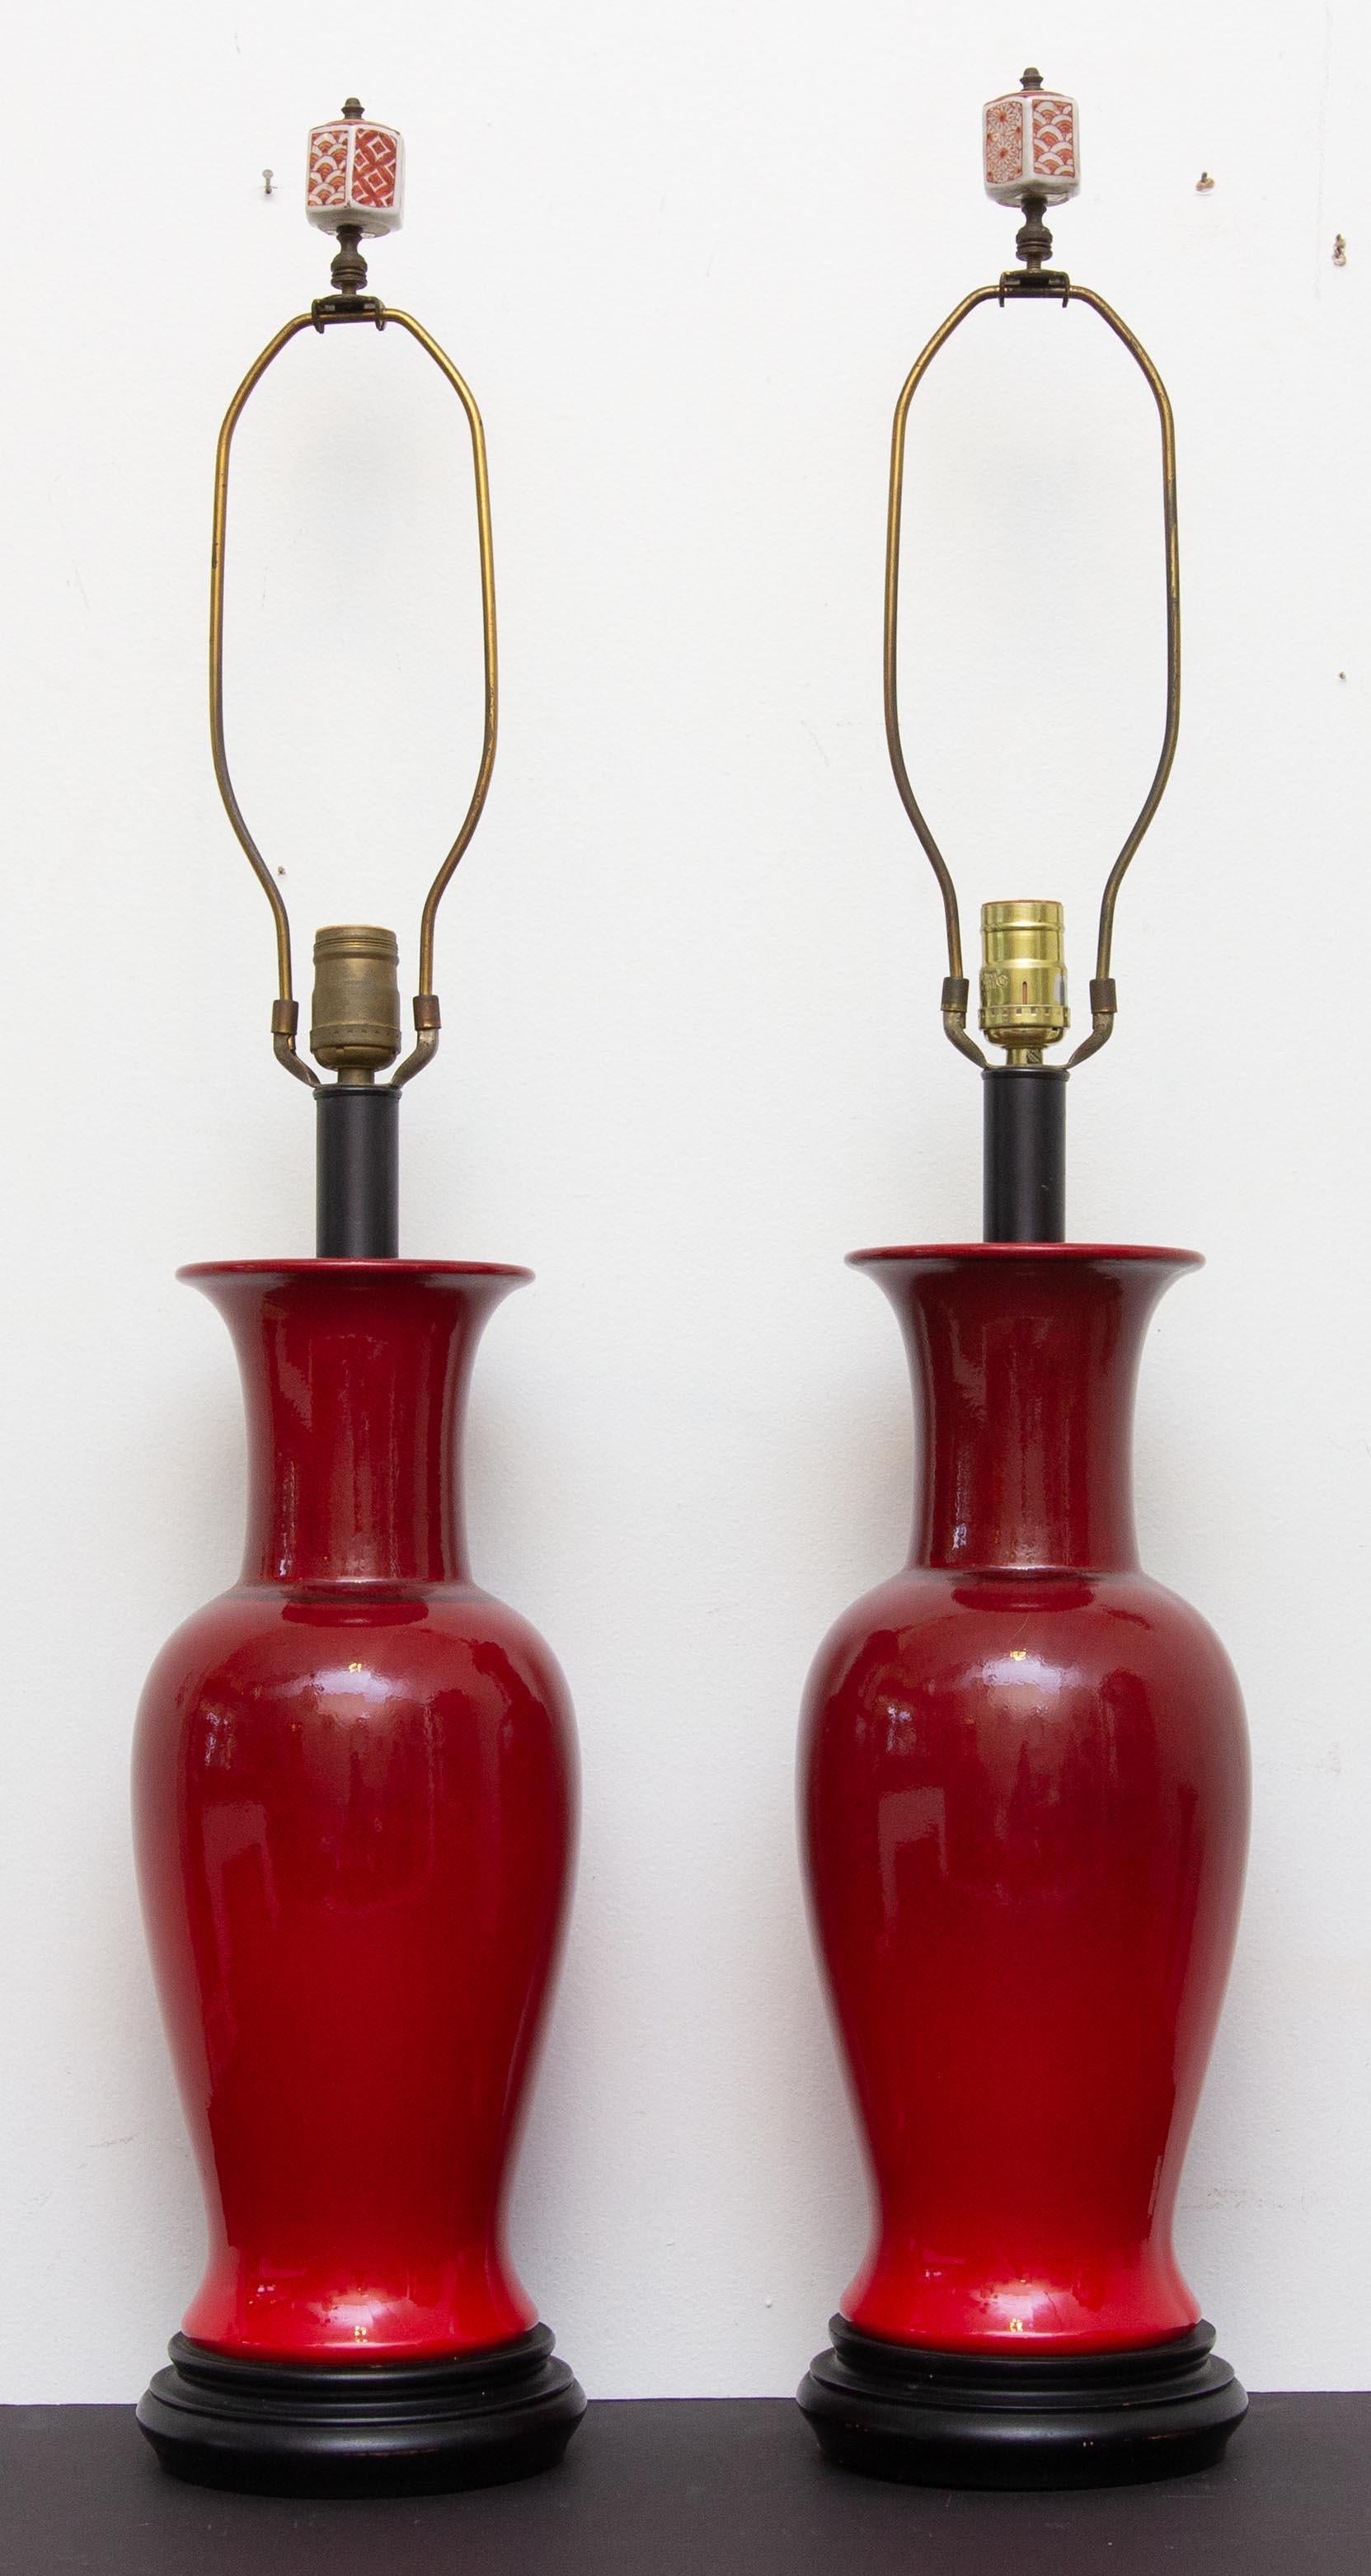 Pair of glazed porcelain sang de boeuf lamps. Oxblood color. Good porcelain finials, circa 1960s. Measures: Height to top of urns 18